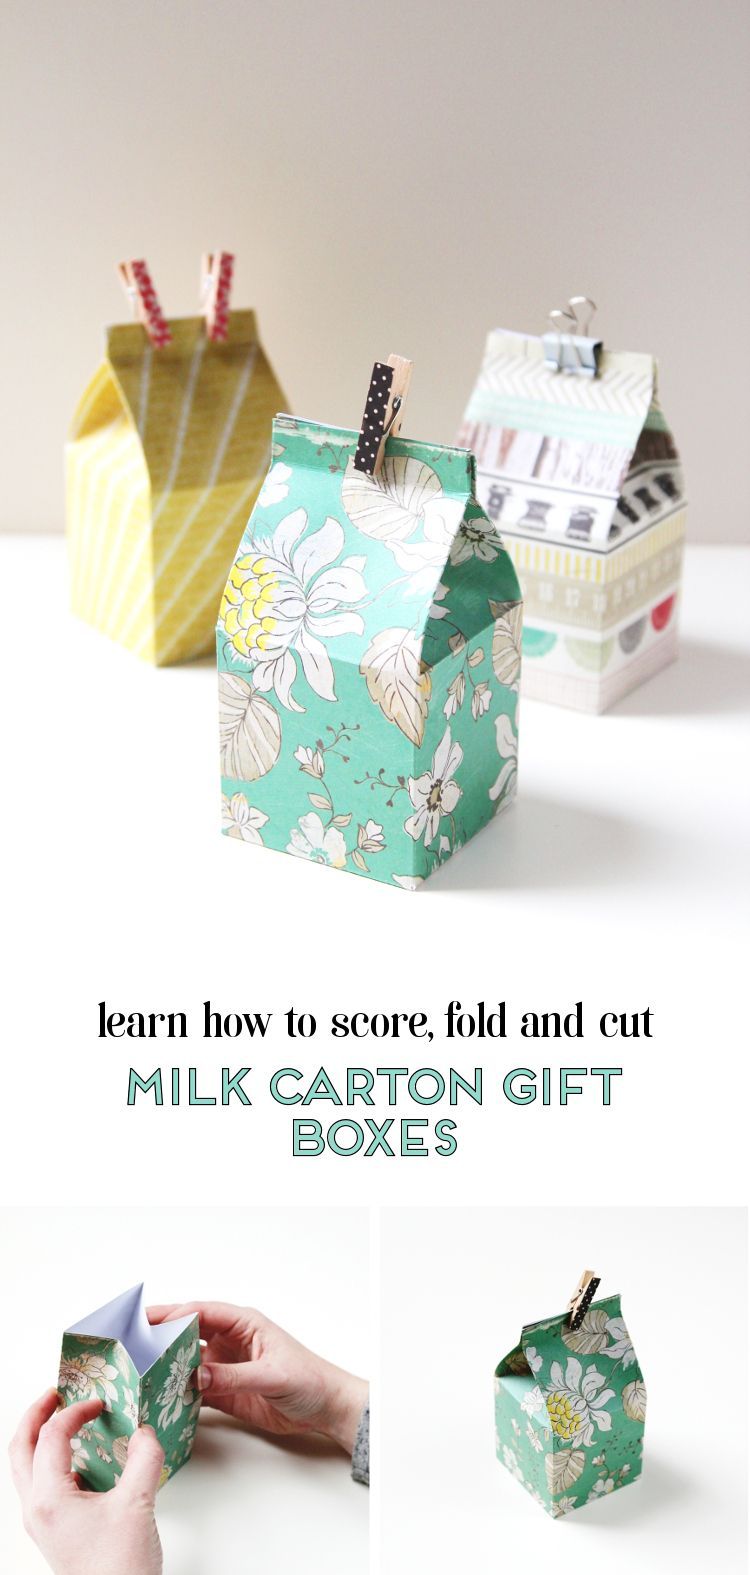 LEARN HOW TO CUT, FOLD AND SCORE DIY MINI MILK CARTON GIFT BOXES. — Gathering Beauty - LEARN HOW TO CUT, FOLD AND SCORE DIY MINI MILK CARTON GIFT BOXES. — Gathering Beauty -   19 diy Gifts paper ideas